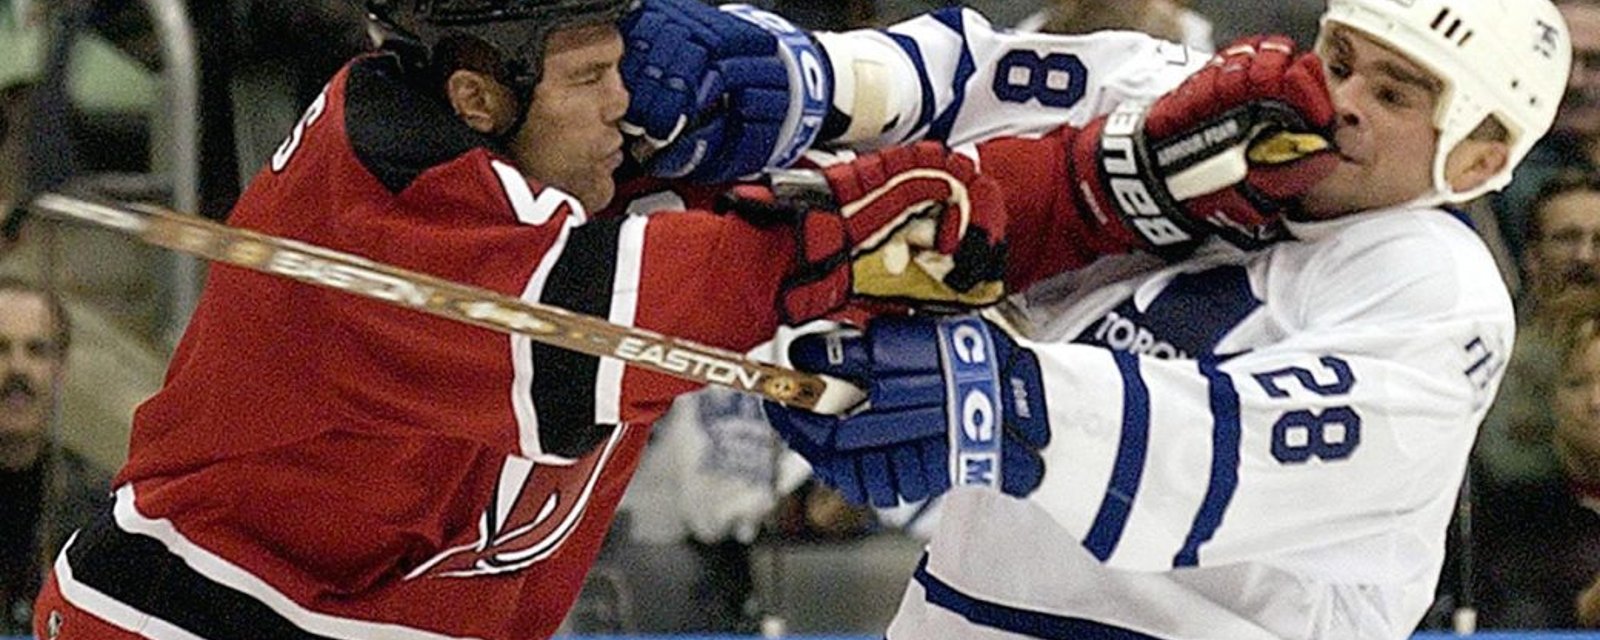 Tie Domi calls Scott Stevens the “biggest phony he ever played against”